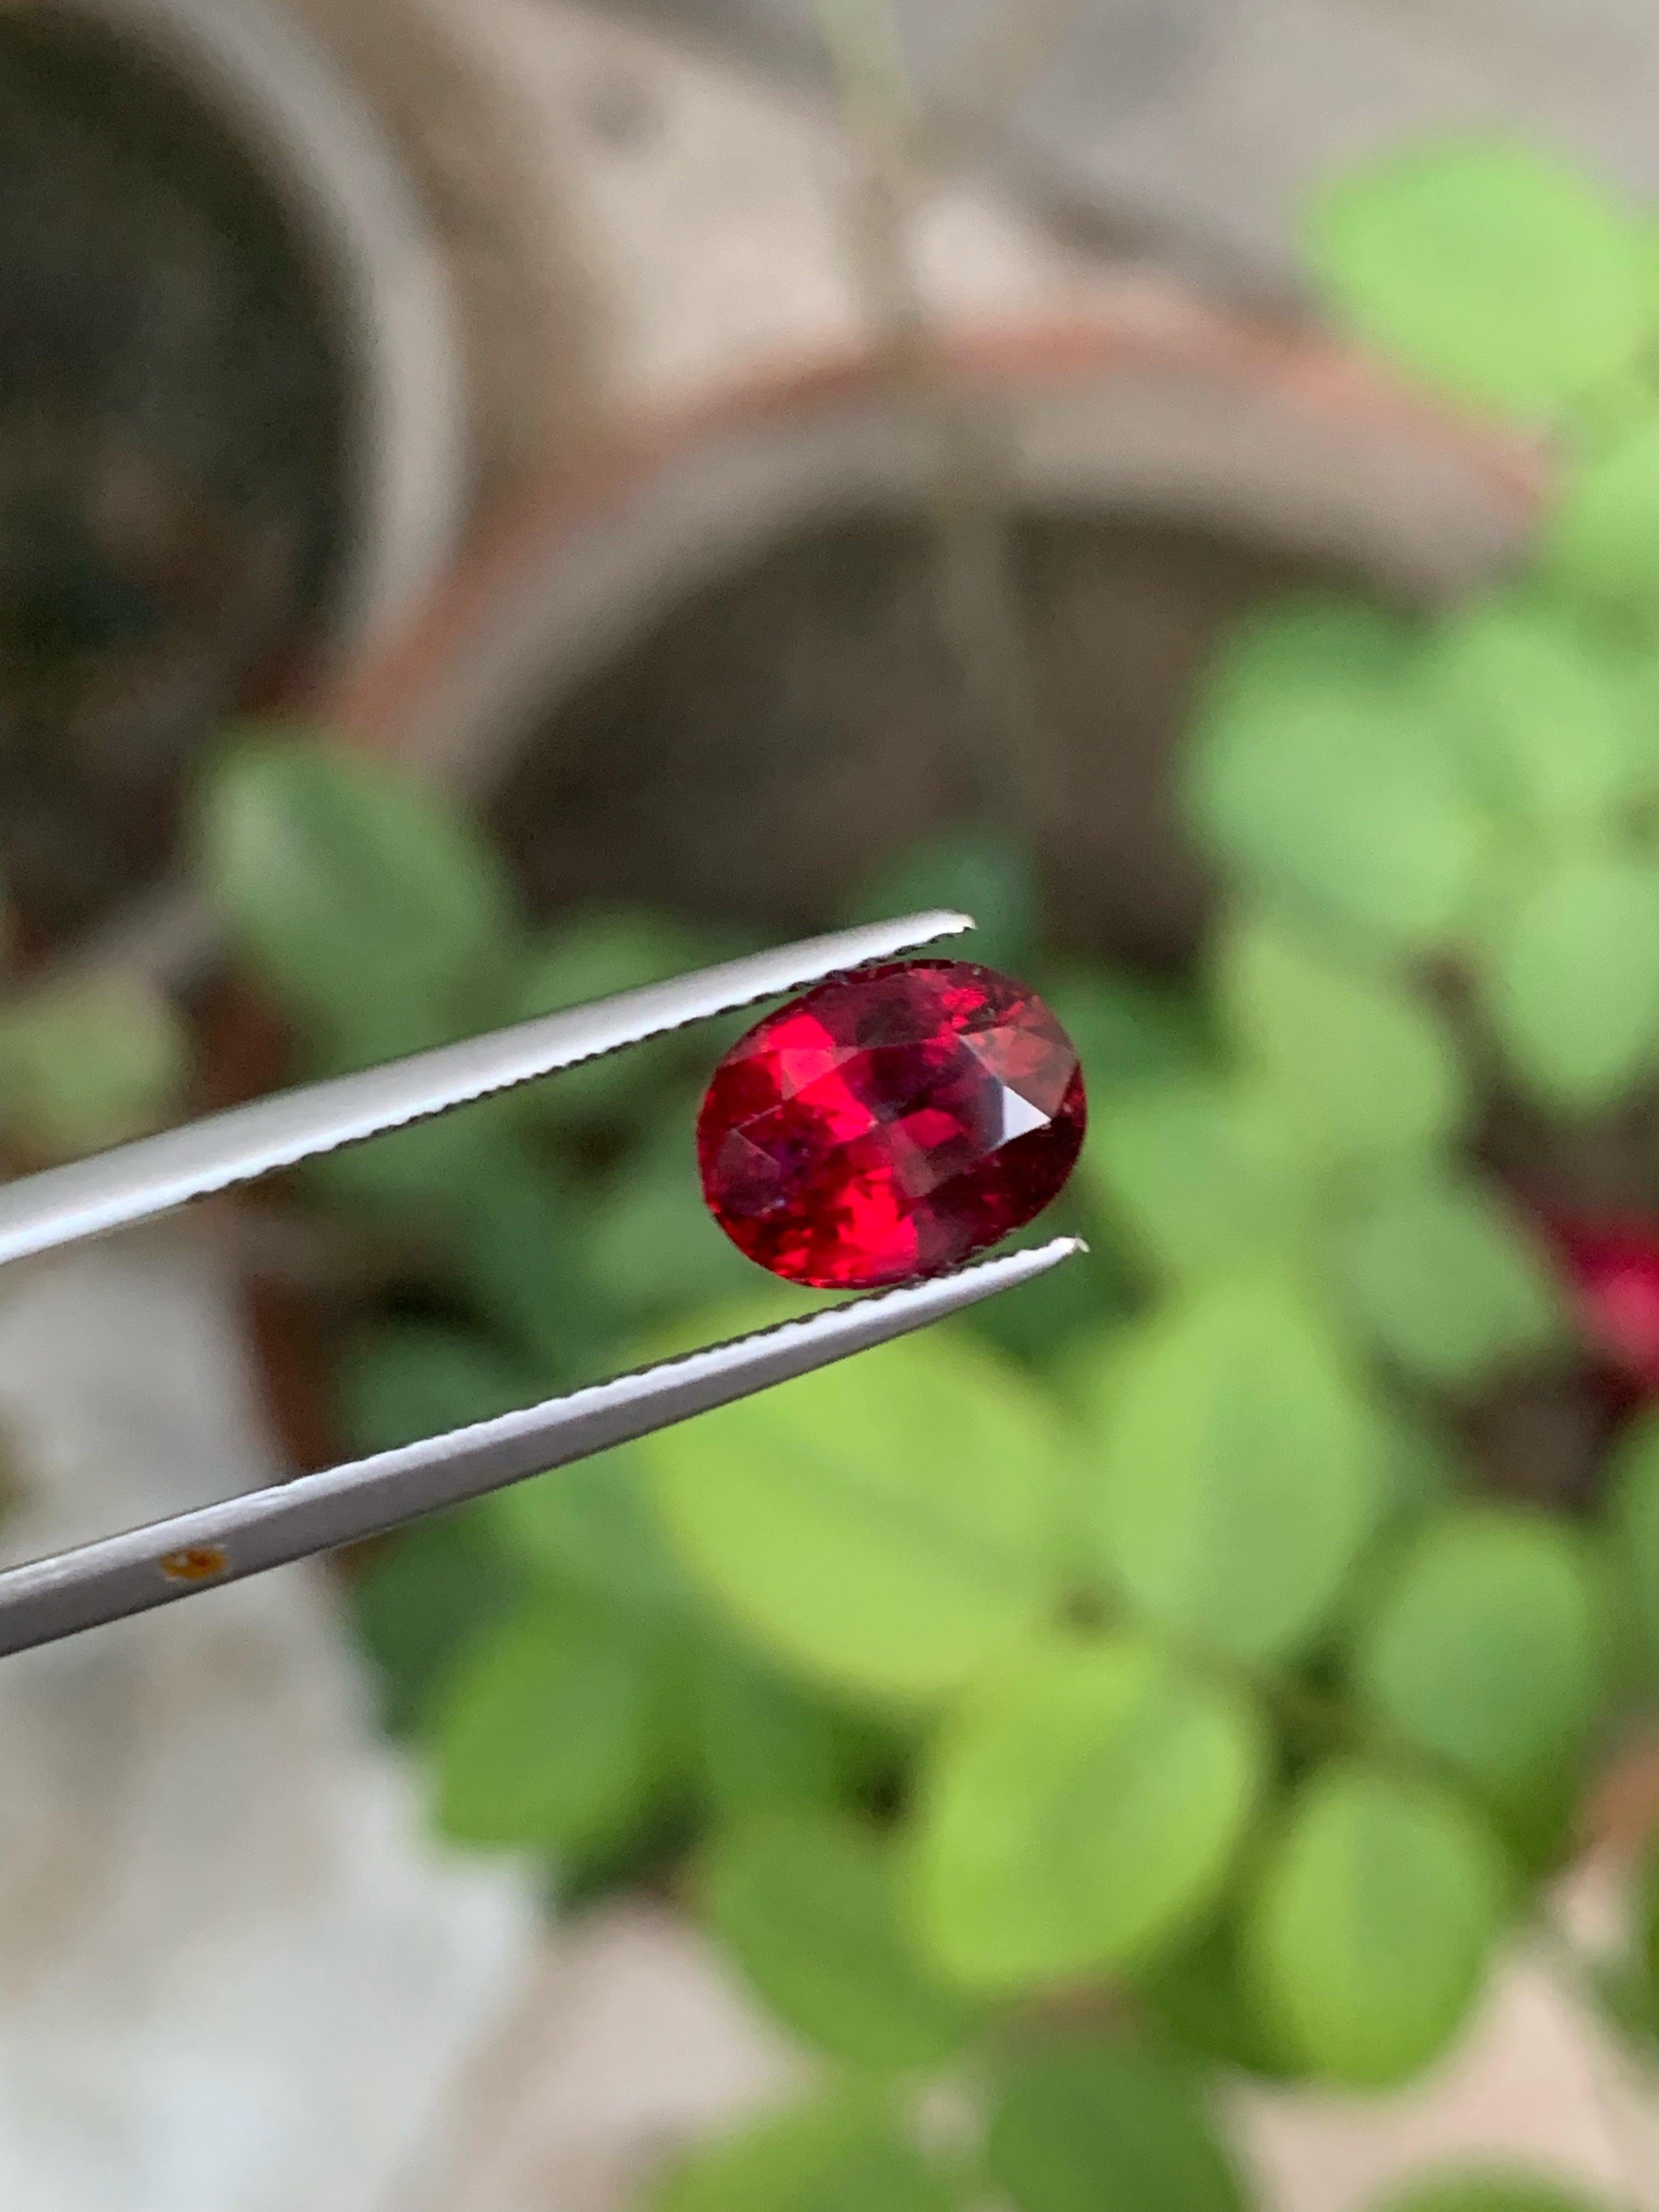 Stunning Deep Red Rubelite Tourmaline Gemstone of 2.45 carats from Africa has a wonderful cut in a Oval shape, incredible Red Color. Great brilliance. This gem is  VVS Clarity.

Product Information:
GEMSTONE TYPE:	Stunning Deep Red Rubelite